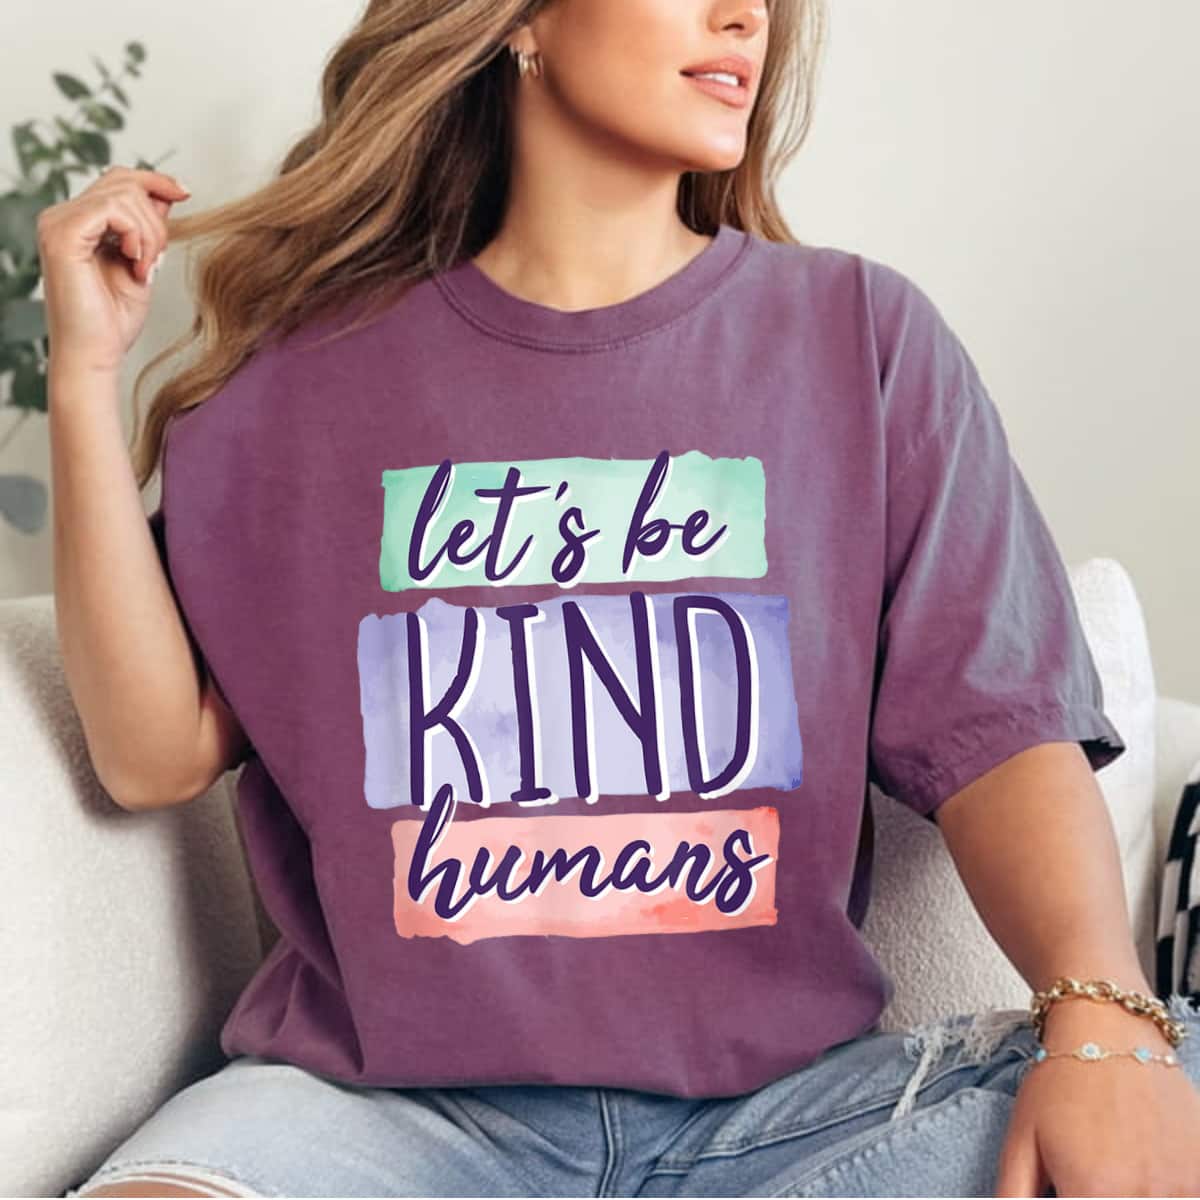 Let's Be Kind Humans Inspirational Cute Graphic Feminist T-Shirt